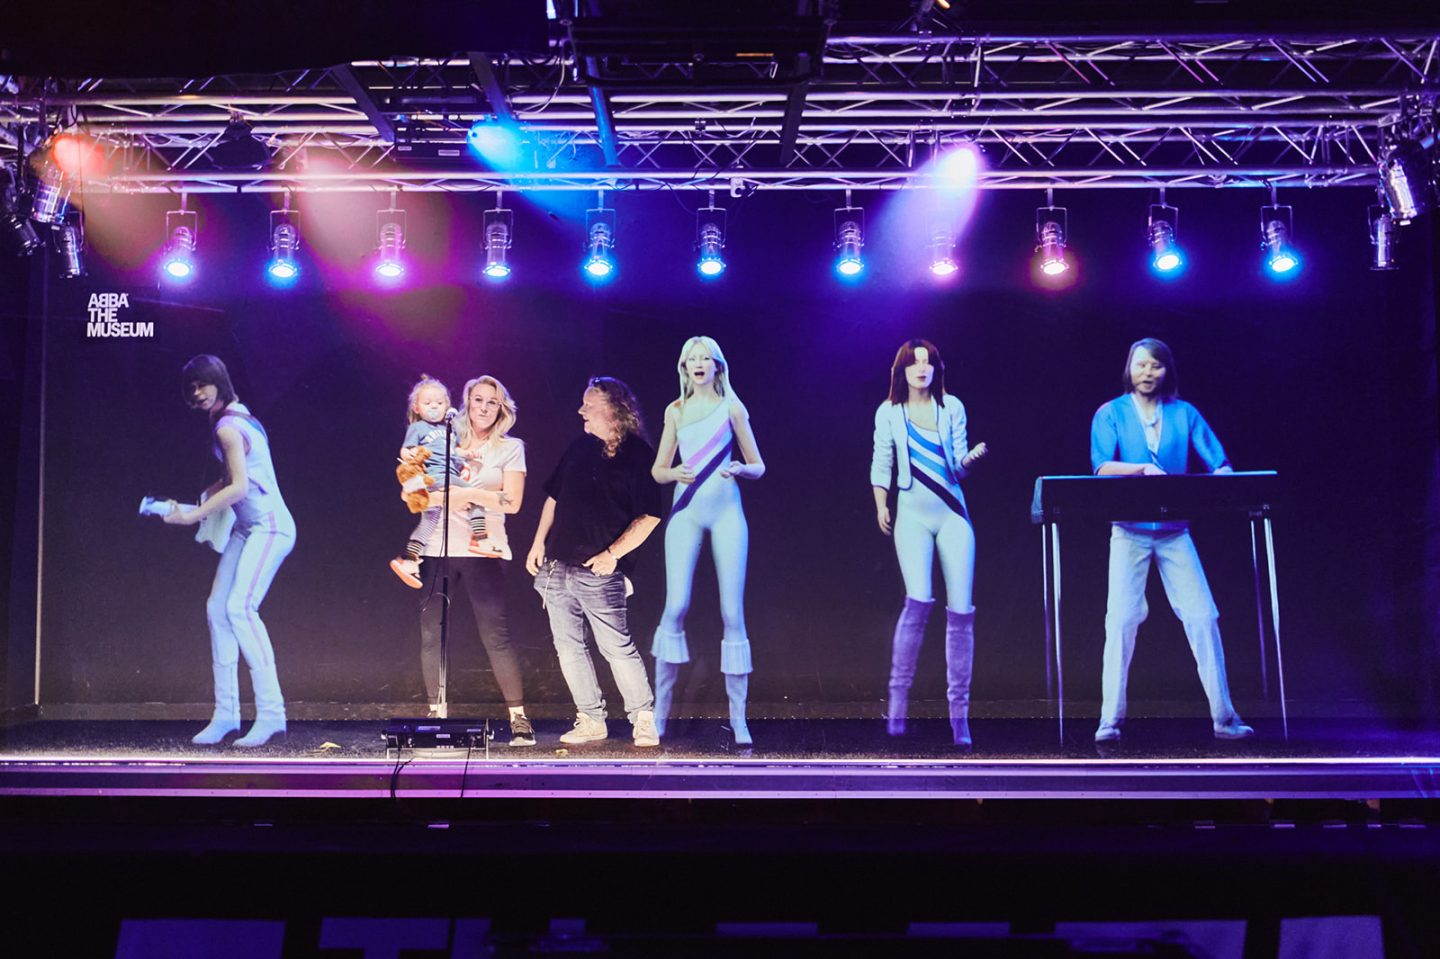 See new ABBA 'Voyage' costumes ahead of band's digital tour